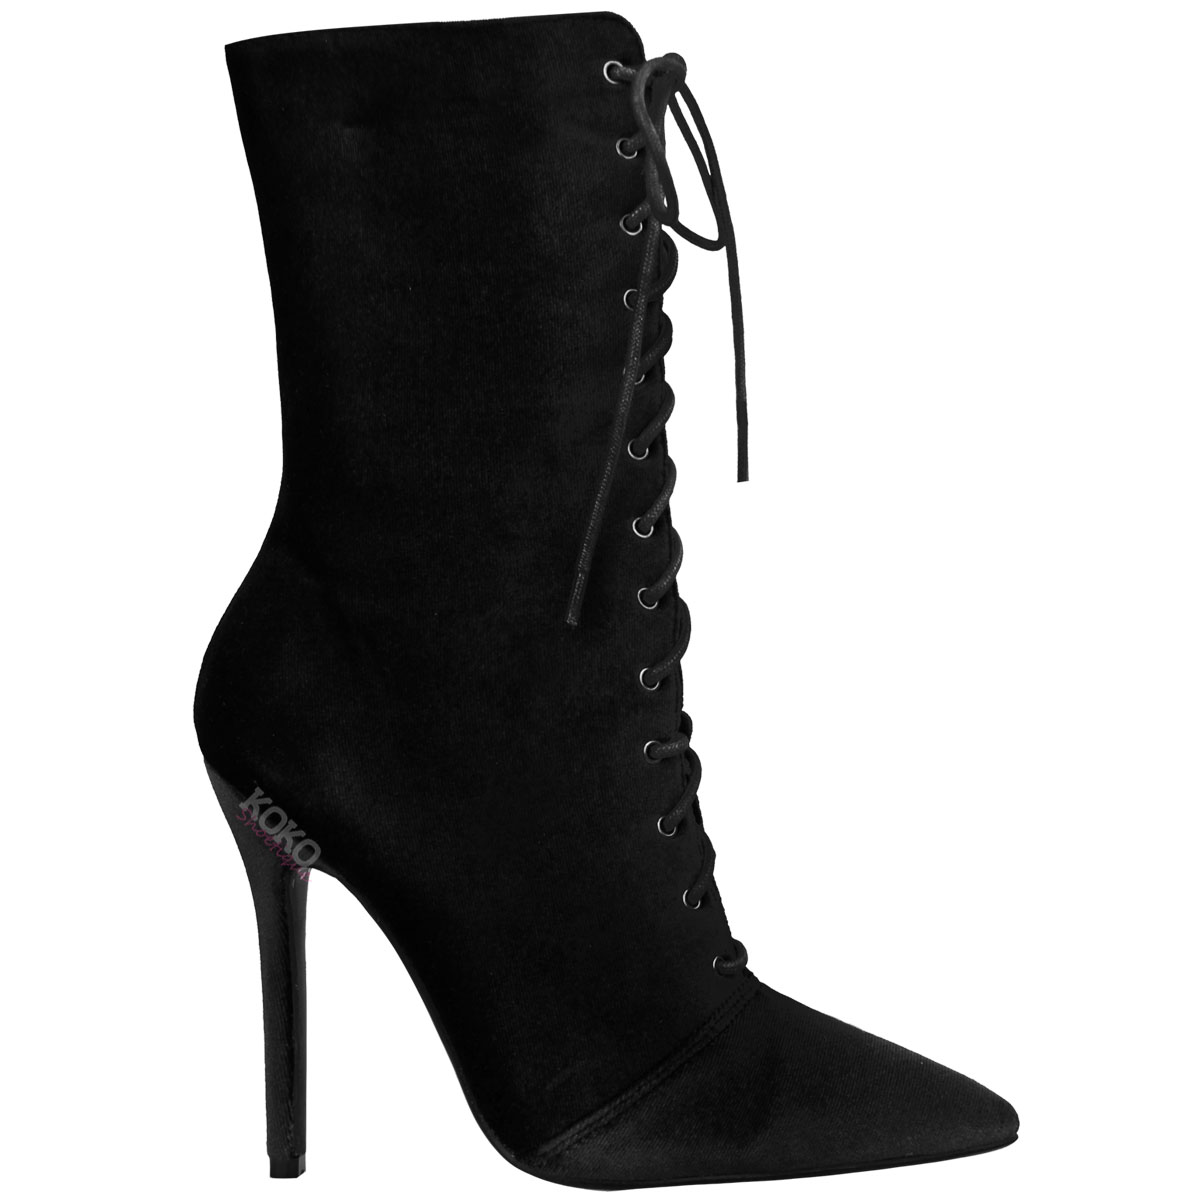 Ladies Womens Lace Up Stretchy High Heel Stiletto Ankle Boots Party